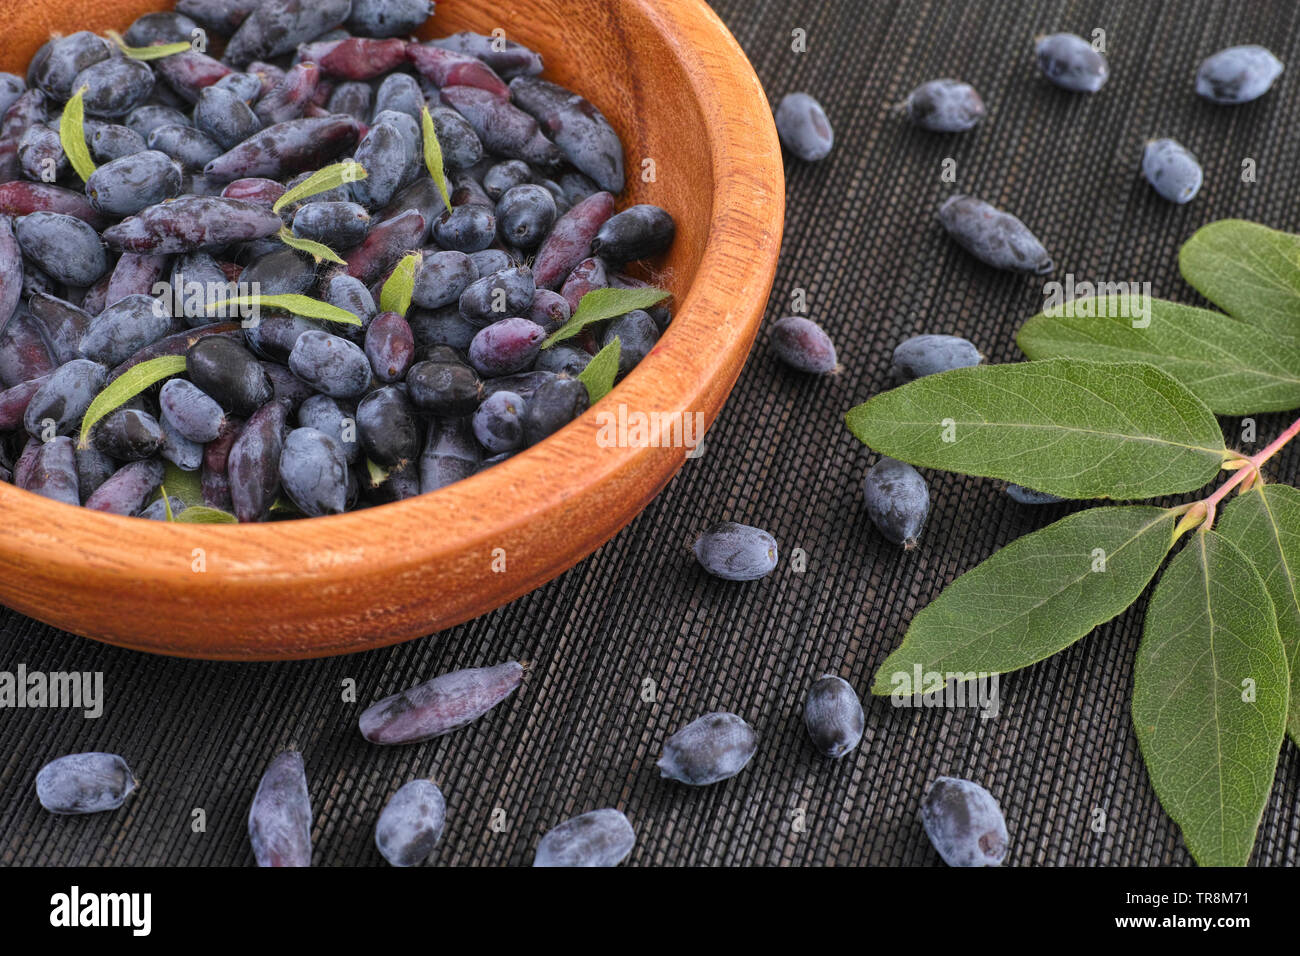 Blue fly honeysuckle in a wooden bowl. Close up. Stock Photo